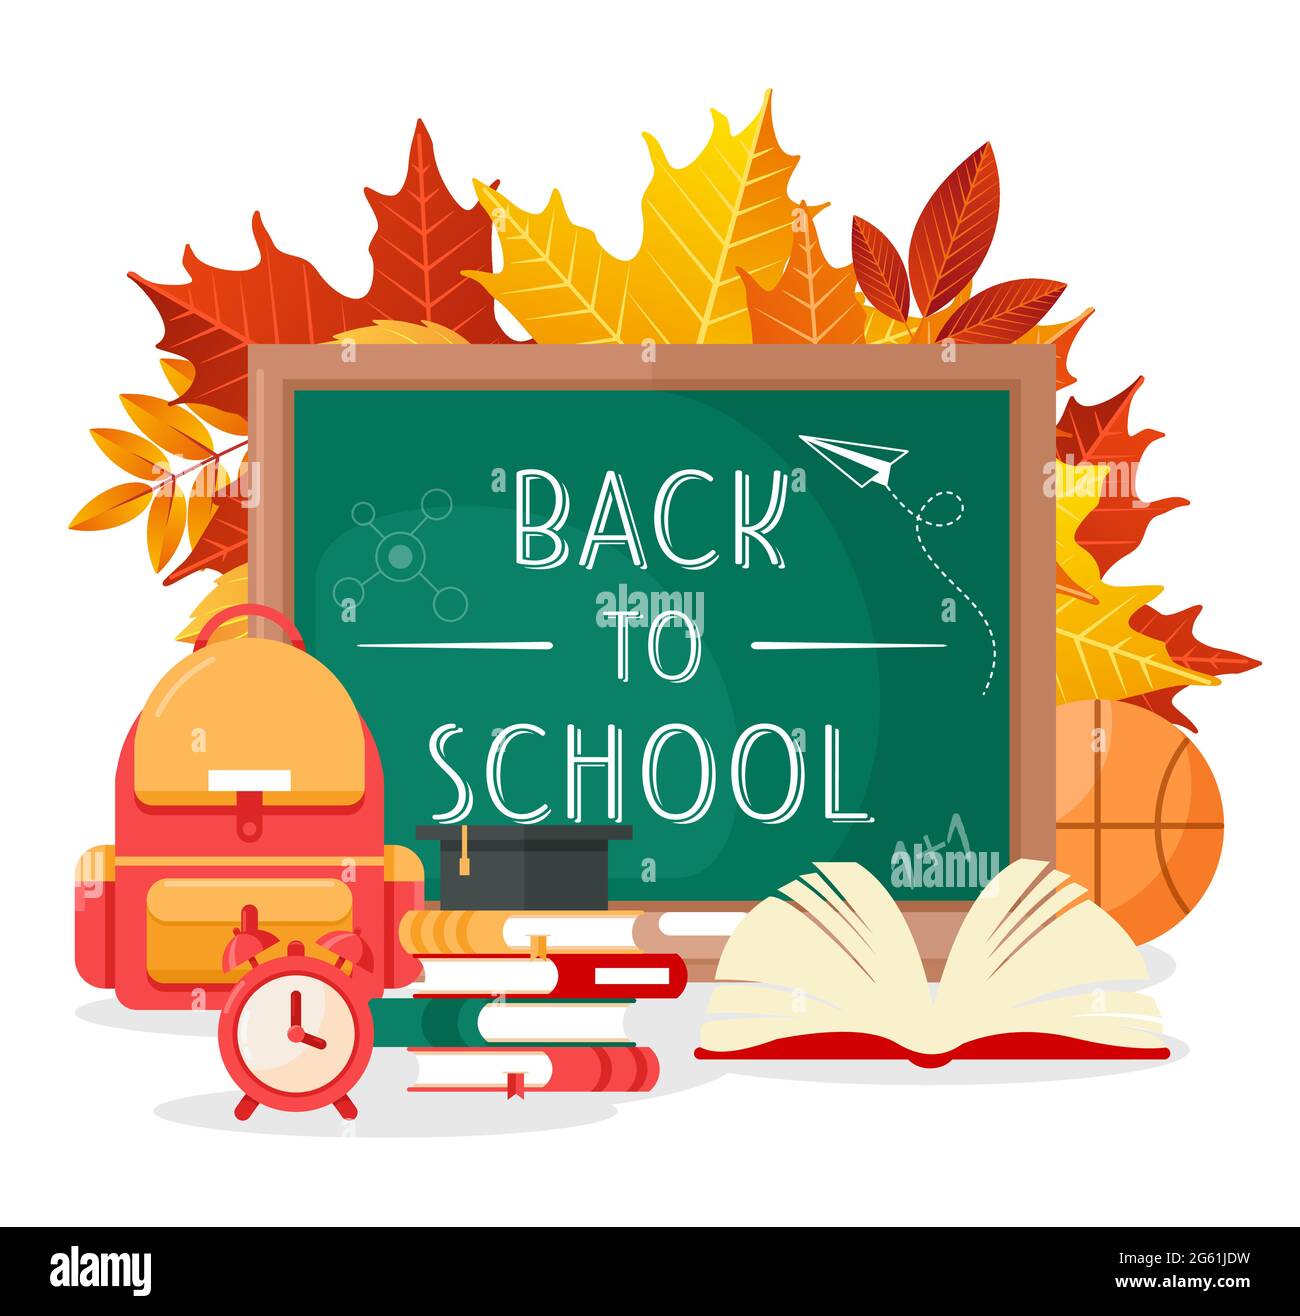 Back to school lettering by chalkboard vector illustration, cartoon flat green schoolboard with school supplies or tools, autumn leaves, backpack Stock Vector